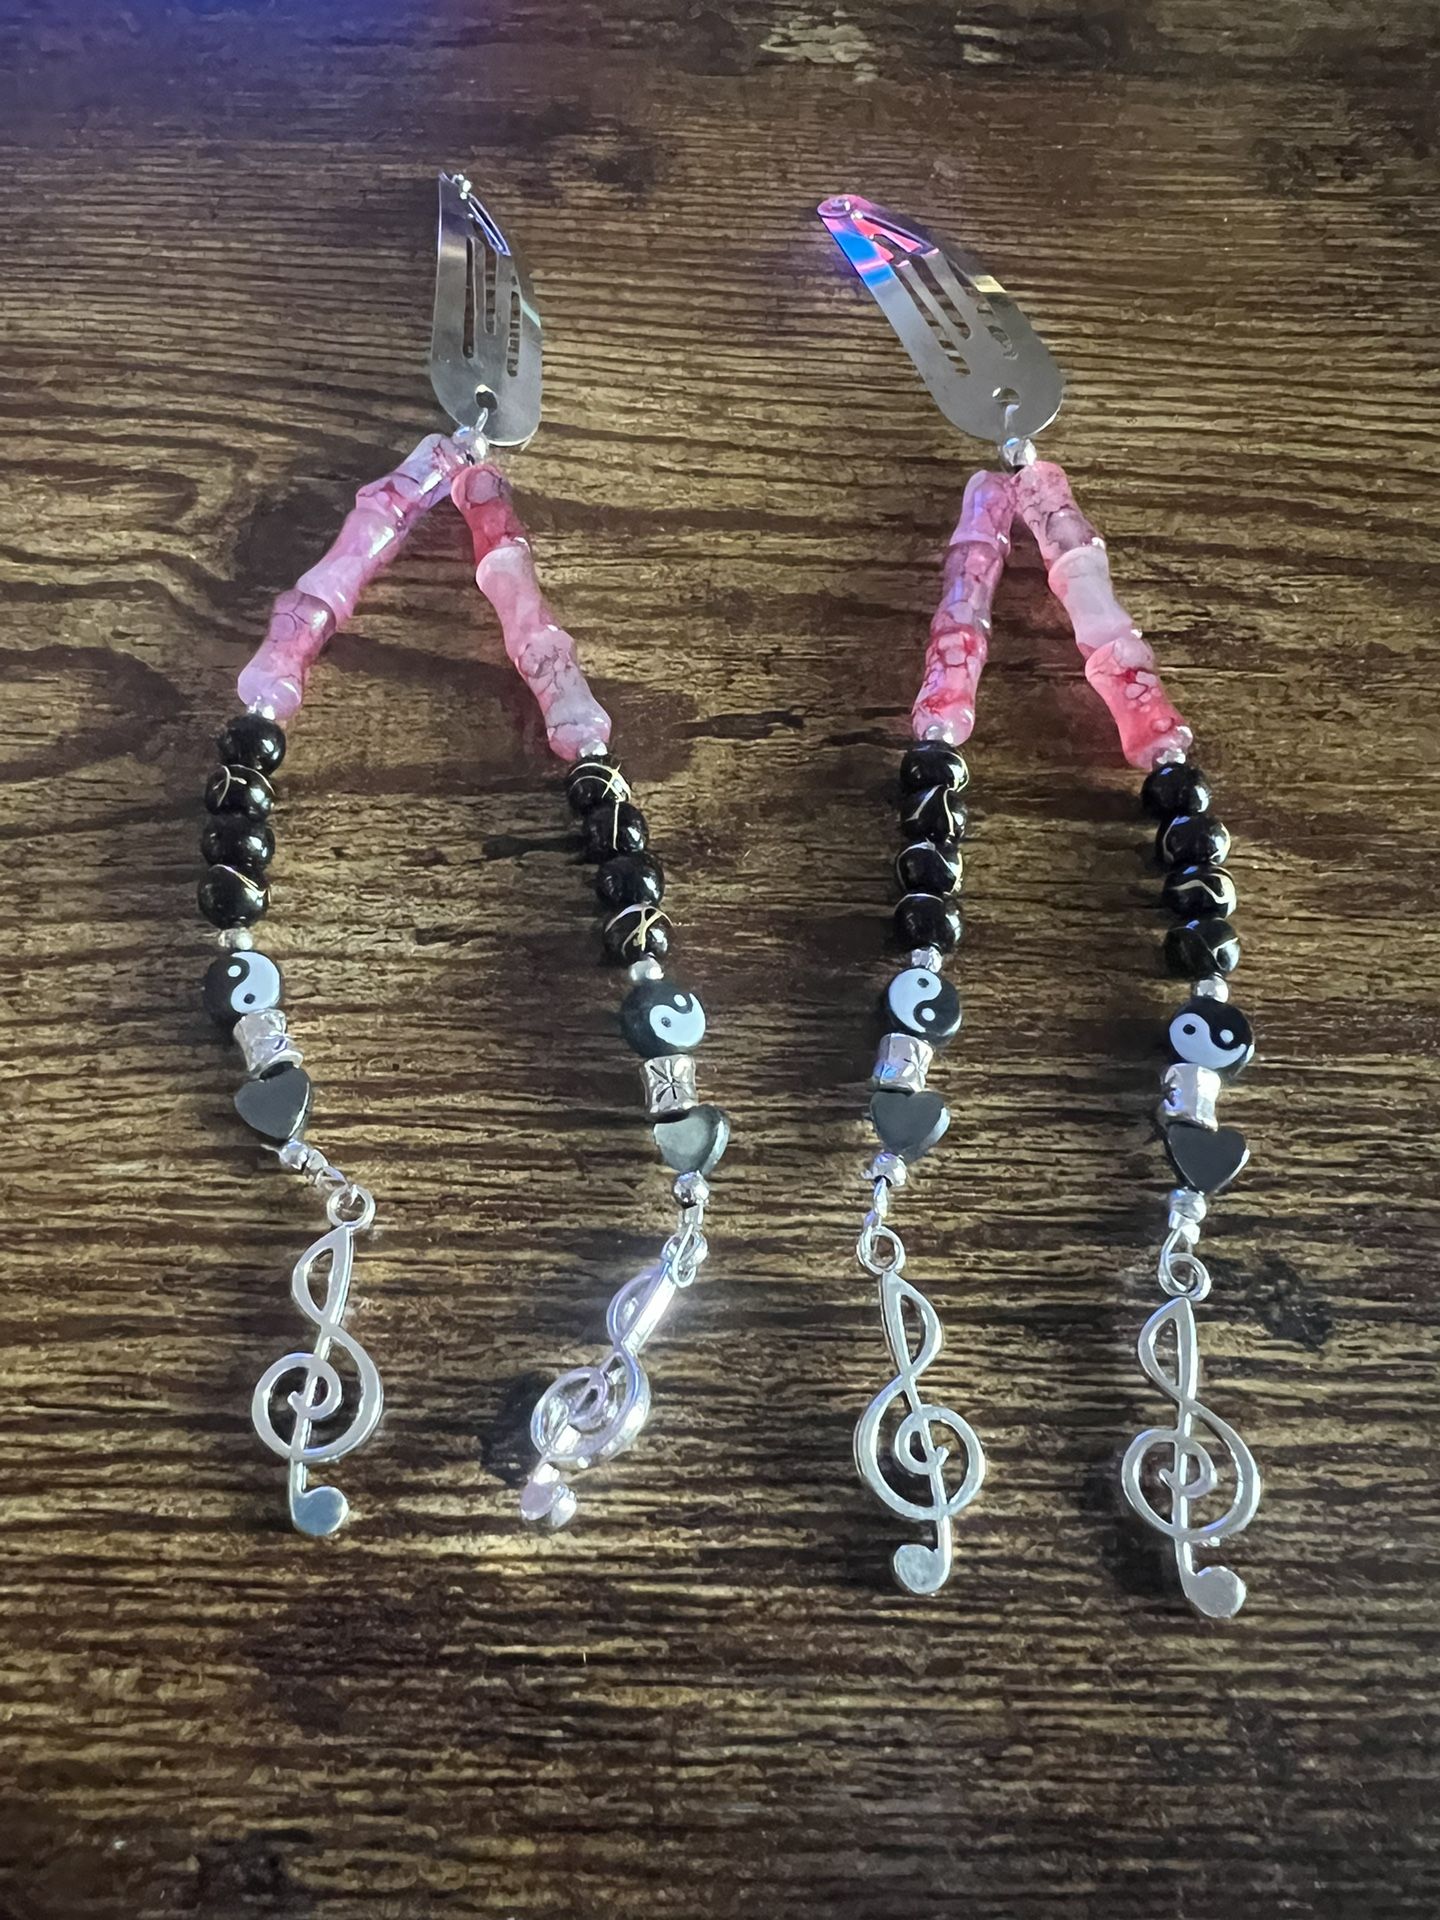 Silver Hair Clips With Beads And Music Note Charms